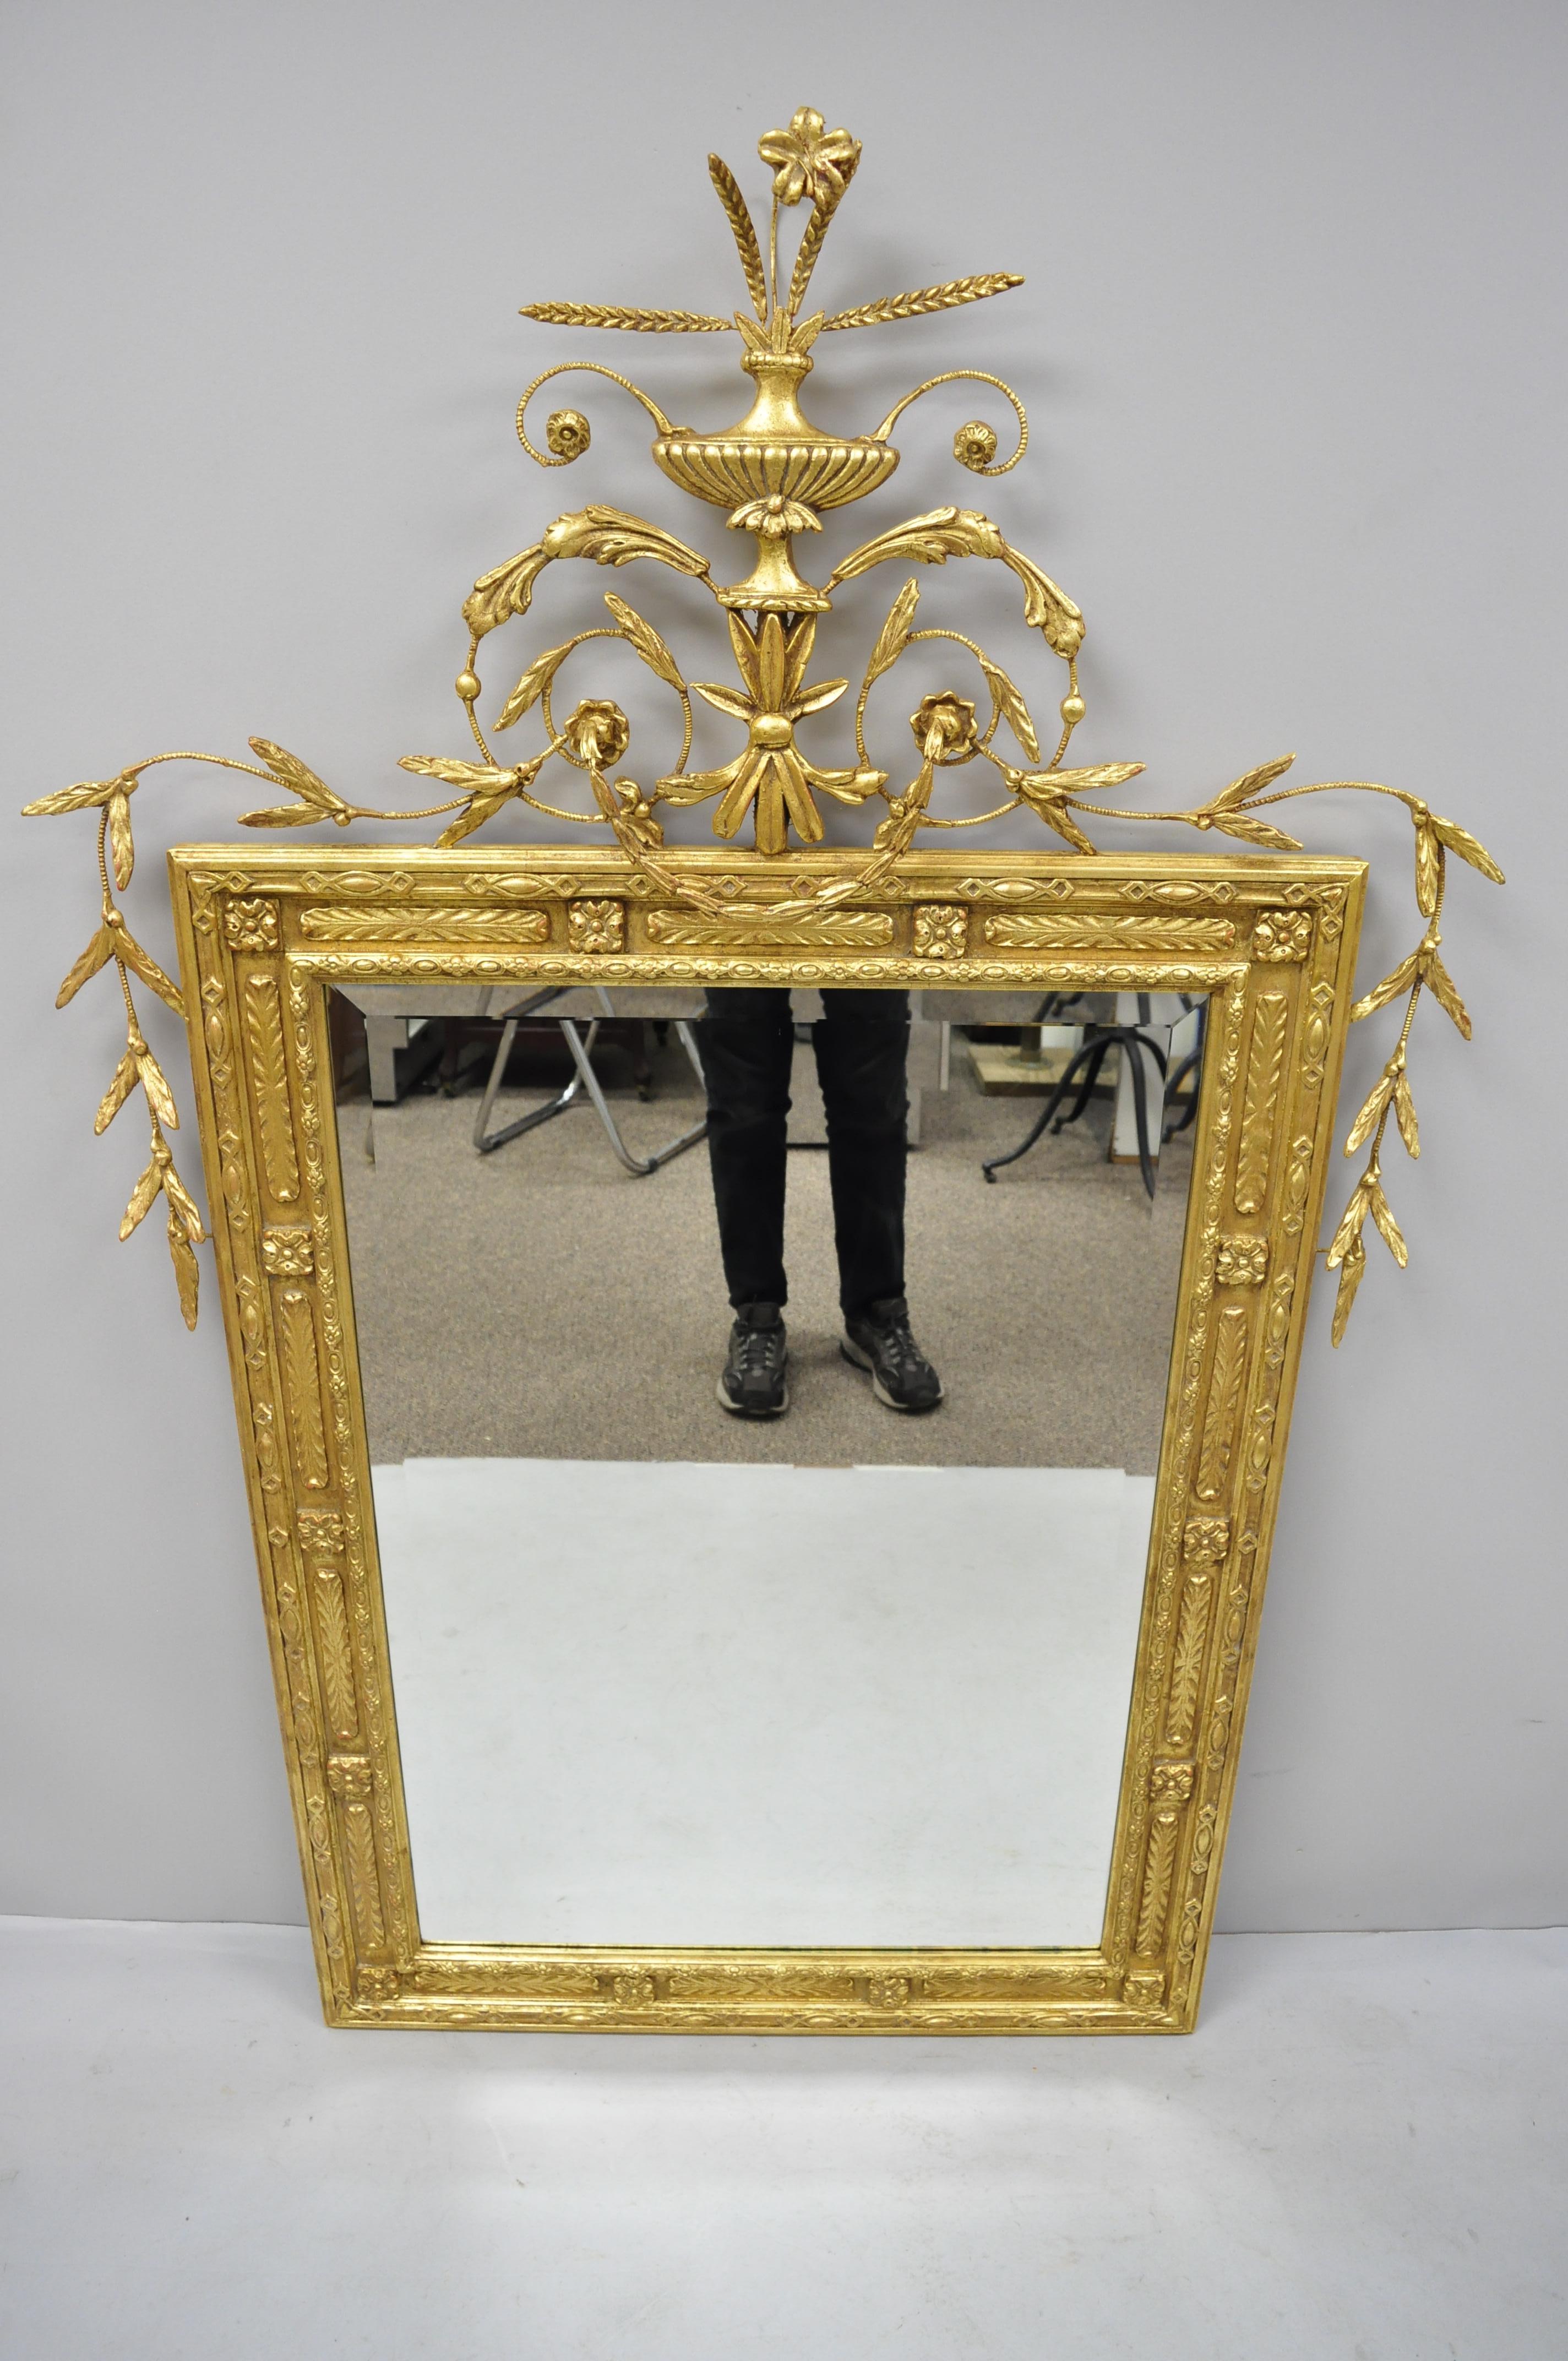 Friedman Brothers large gold gilt Adams style beveled mirror. Item features urn and leafy crown, gold gilt frame, beveled glass central mirror, original label, great style and form, circa late 20th to early 21st century. Measurements: 64